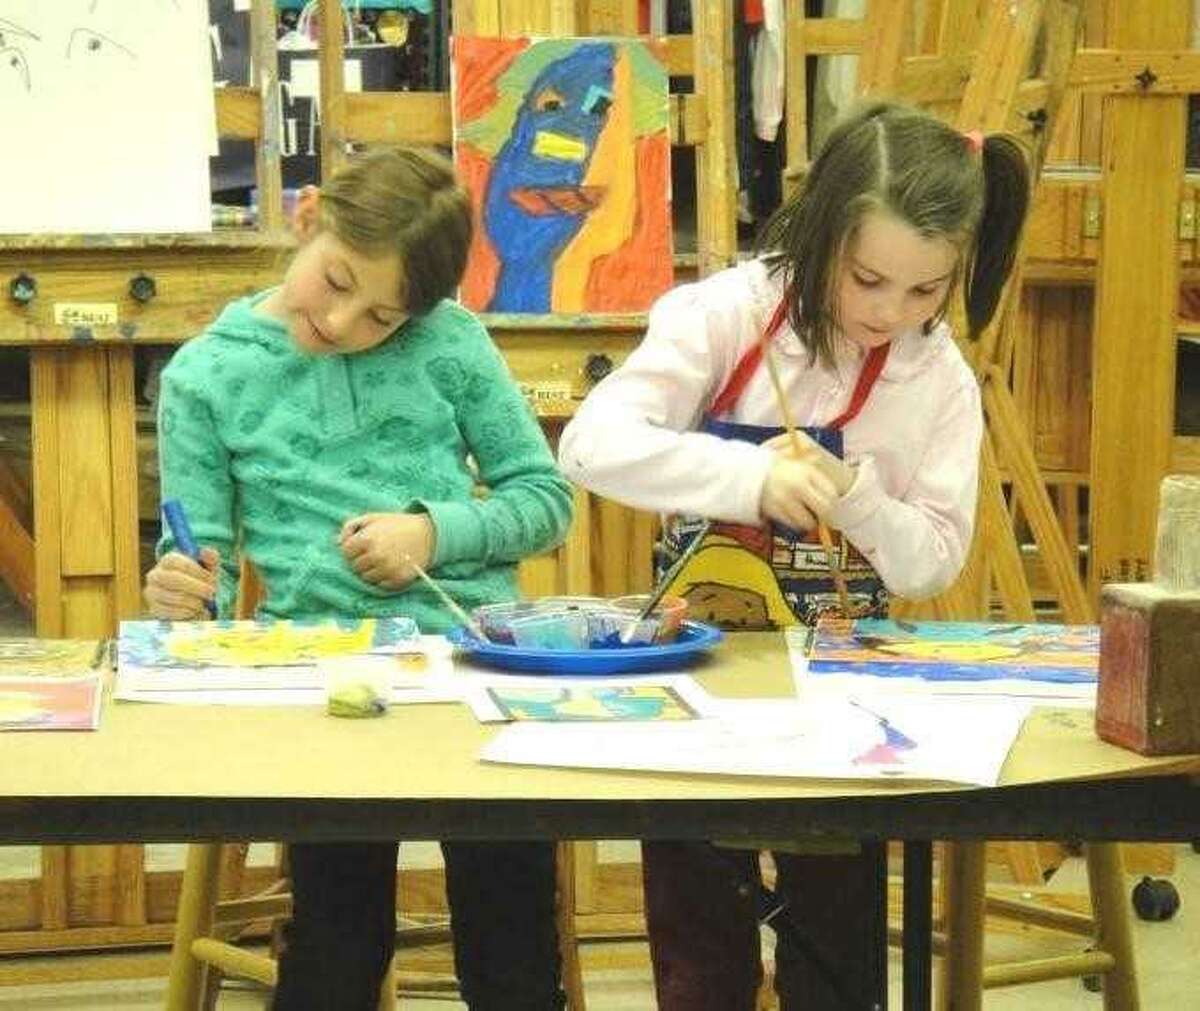 The Greenwich Art Society will holds its Kids Summer Art Camp from June 24 to June 28